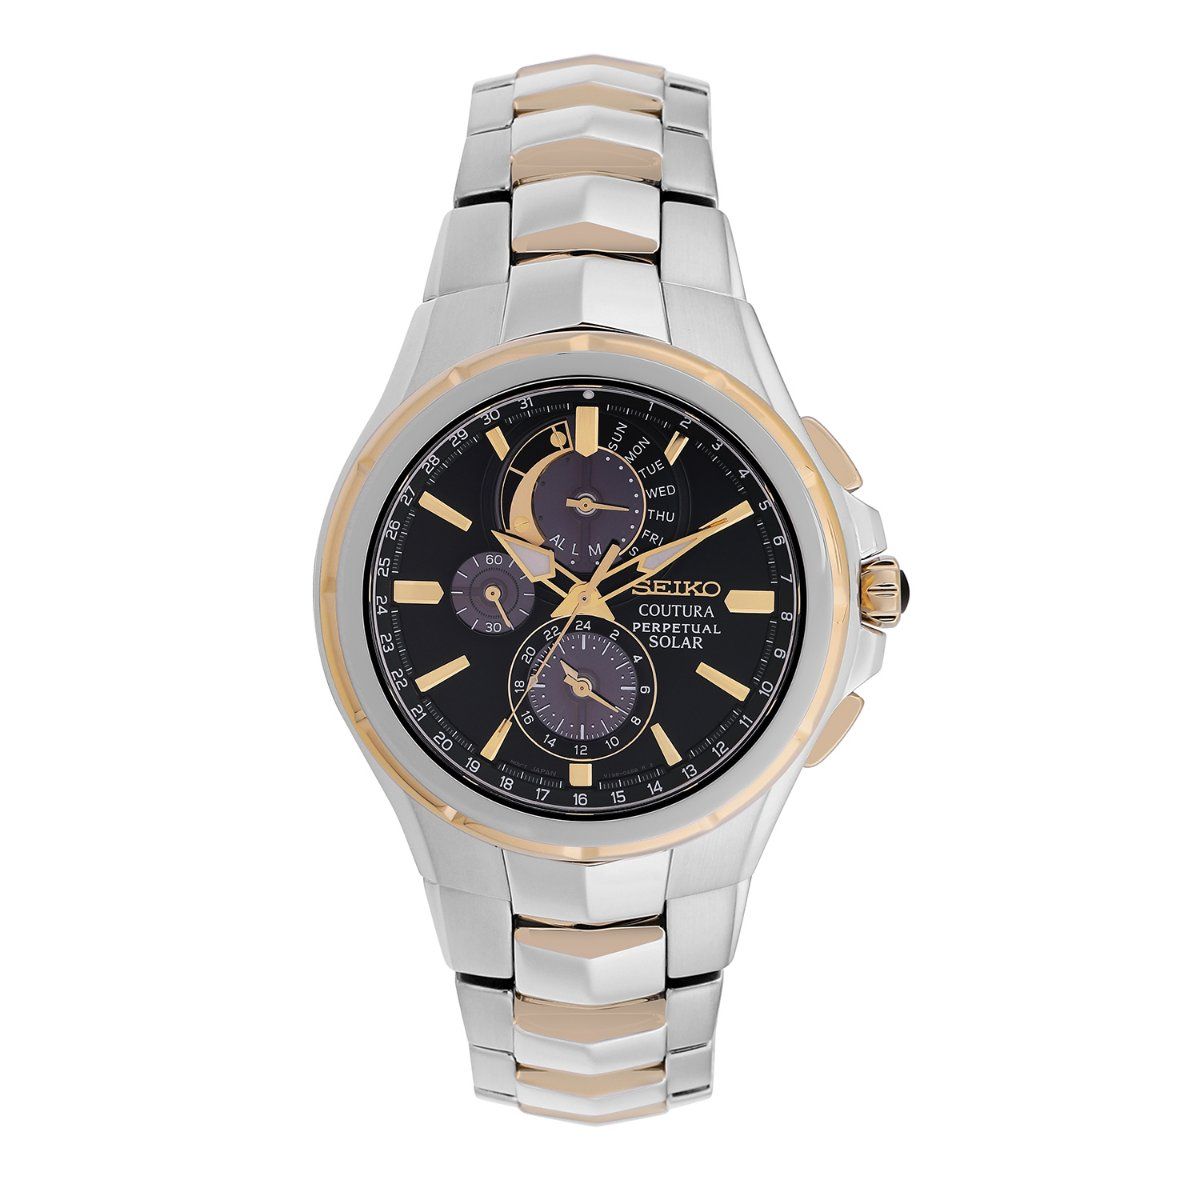 SEIKO Coutura Analog Black Dial Mens Watch-Ssc764P1: Buy SEIKO Coutura  Analog Black Dial Mens Watch-Ssc764P1 Online at Best Price in India | Nykaa